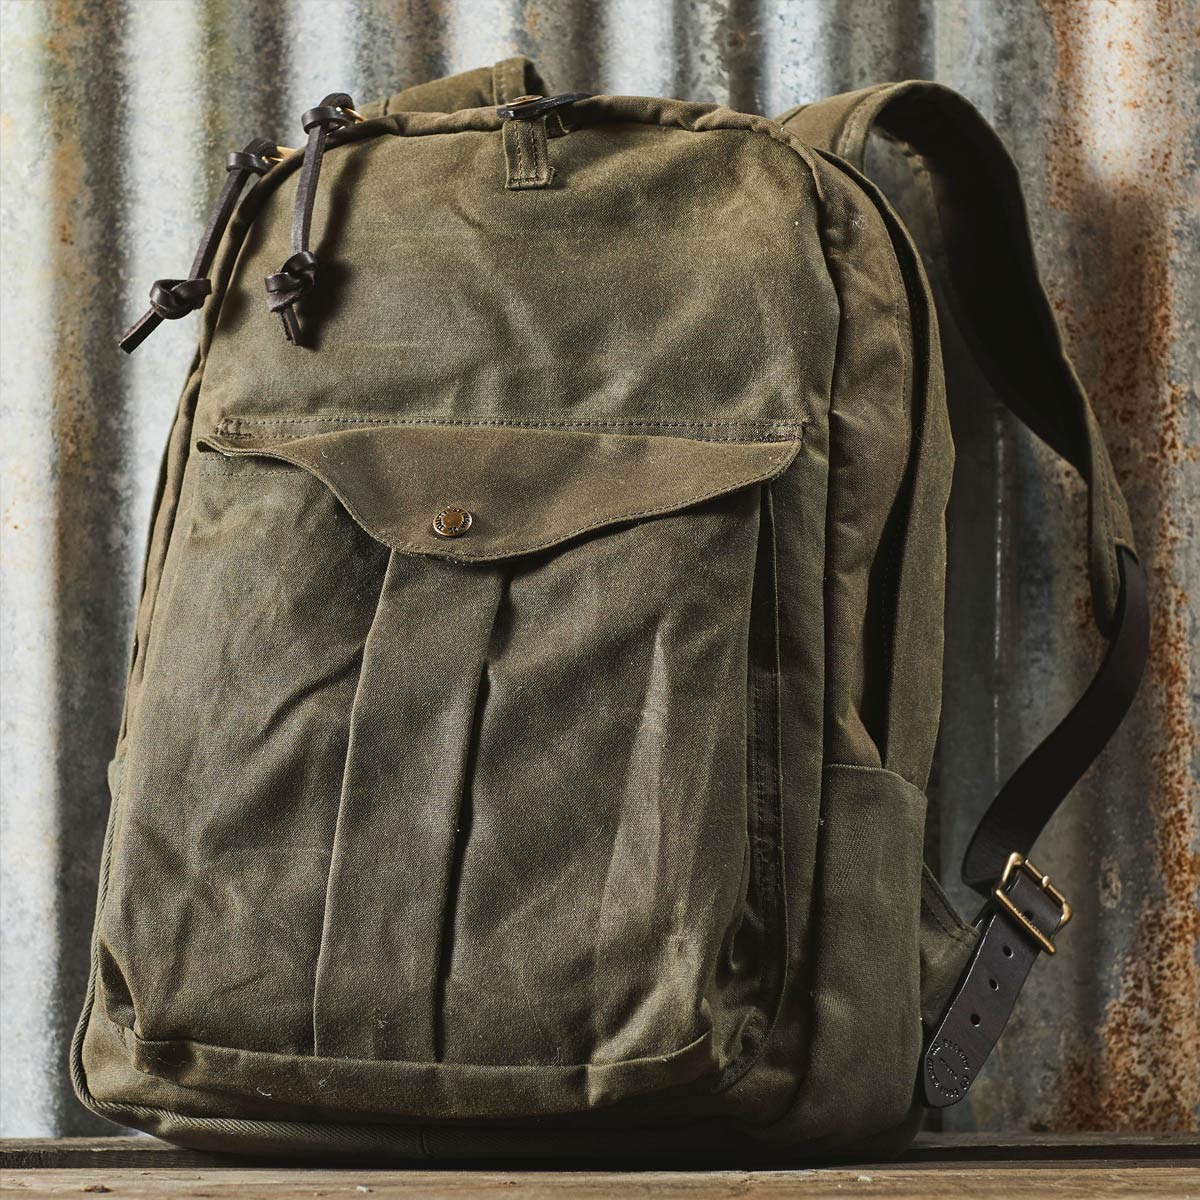 Filson Journeyman Backpack 20231638 Tan, great for hiking and for hauling stuff around town